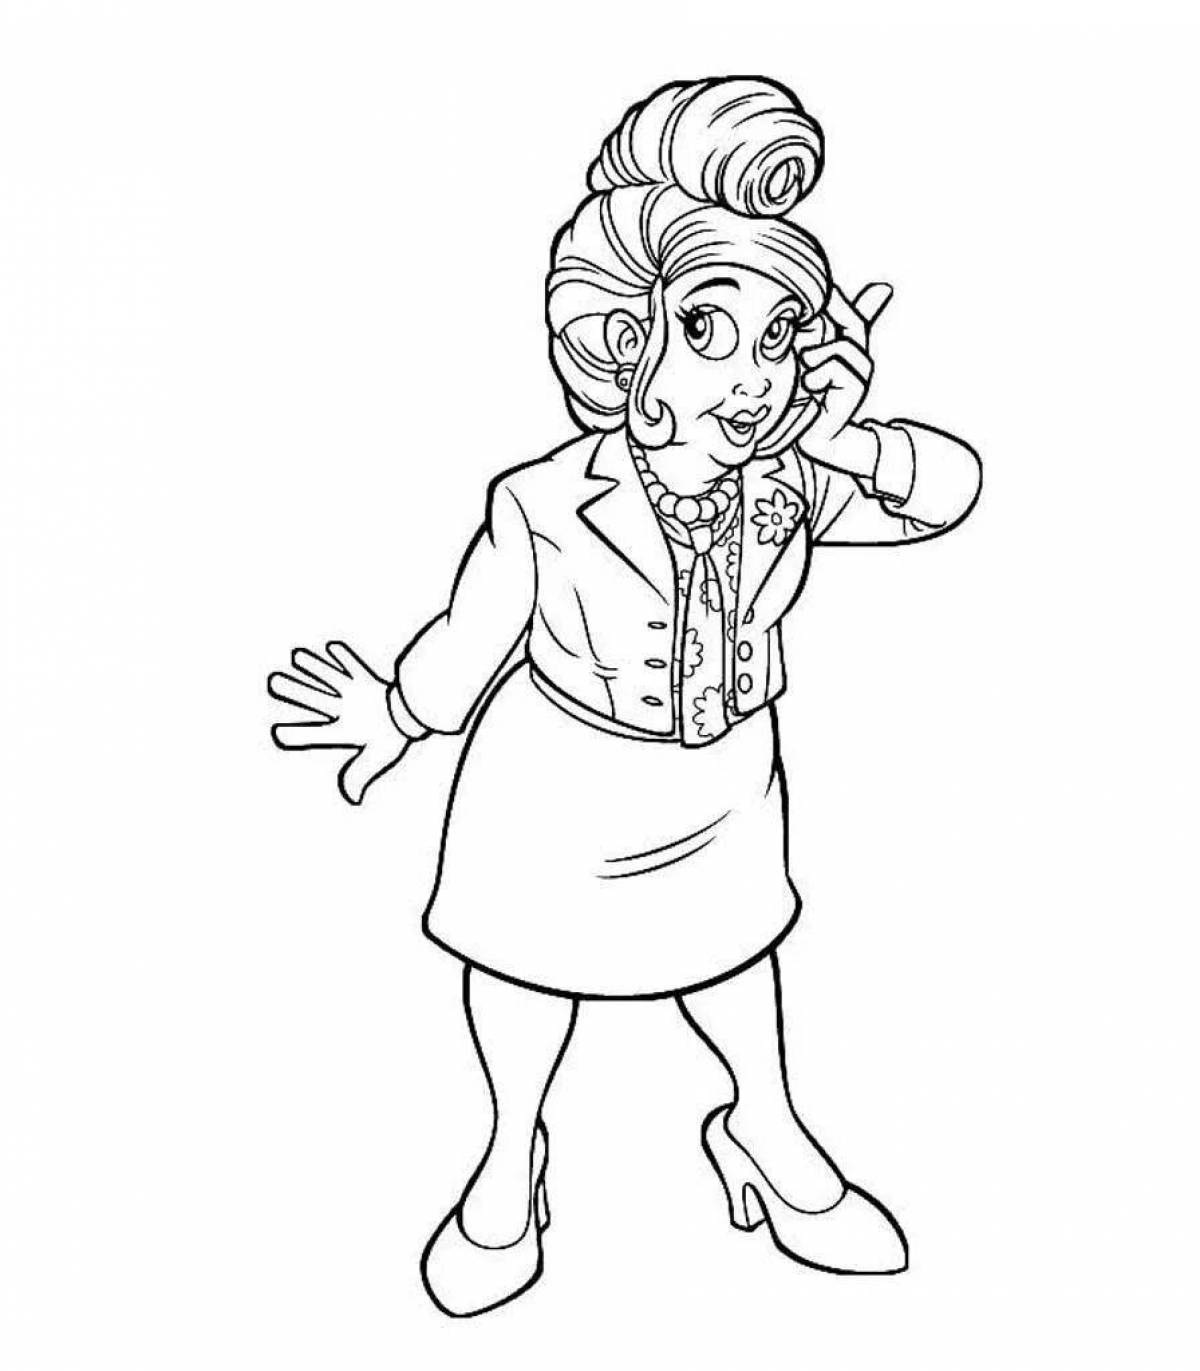 Miss tee coloring page